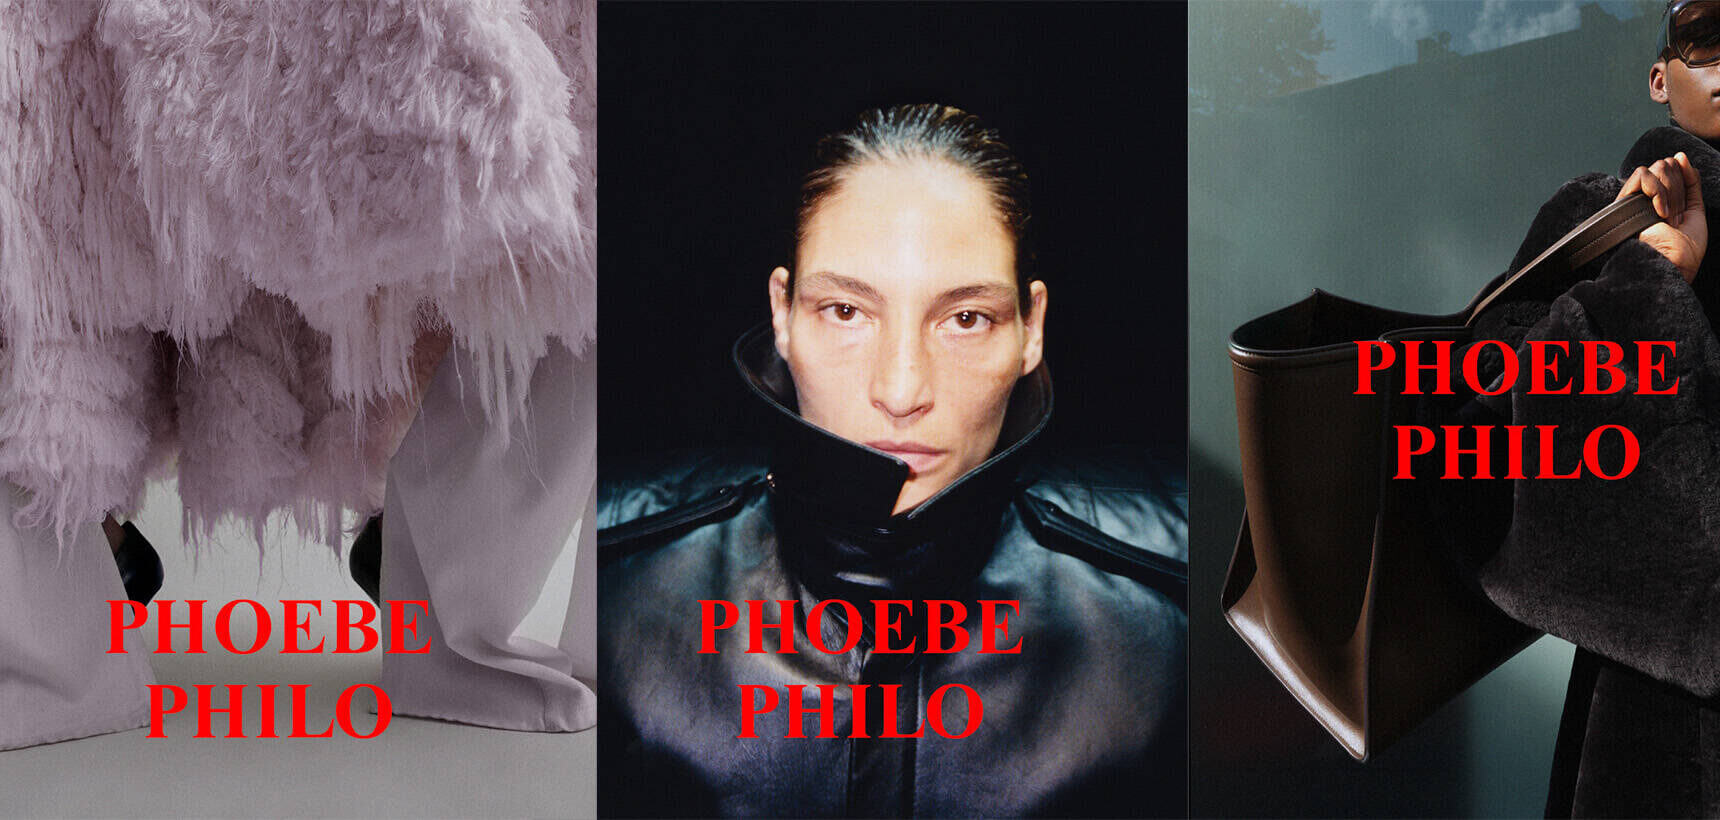 Phoebe Philo's Long Awaited Collection is Finally Live